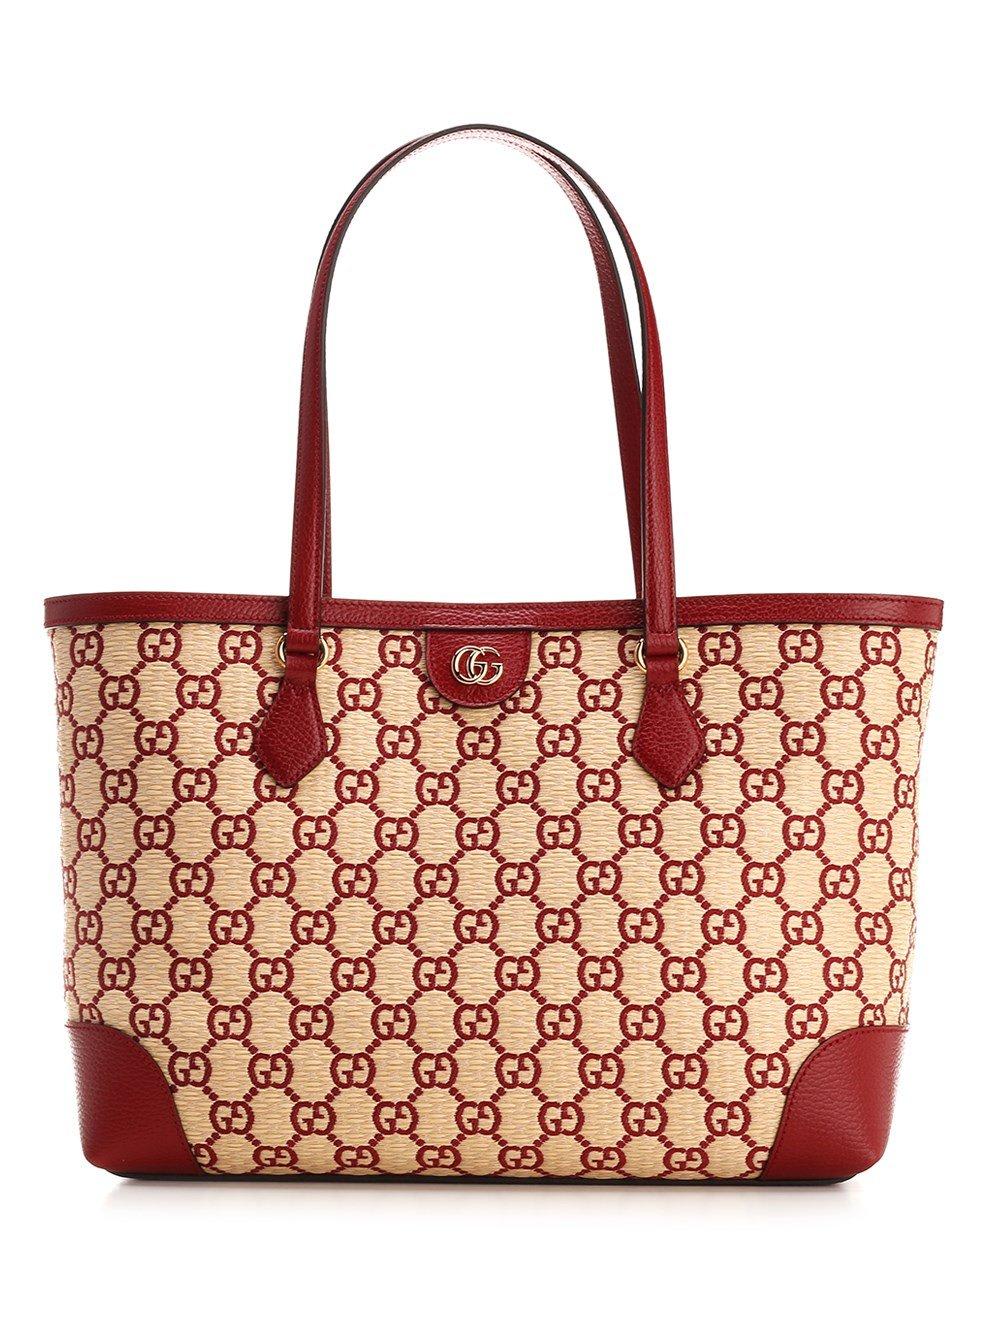 Gucci Ophidia Gg Logo Monogram Tote Bag In Rosso